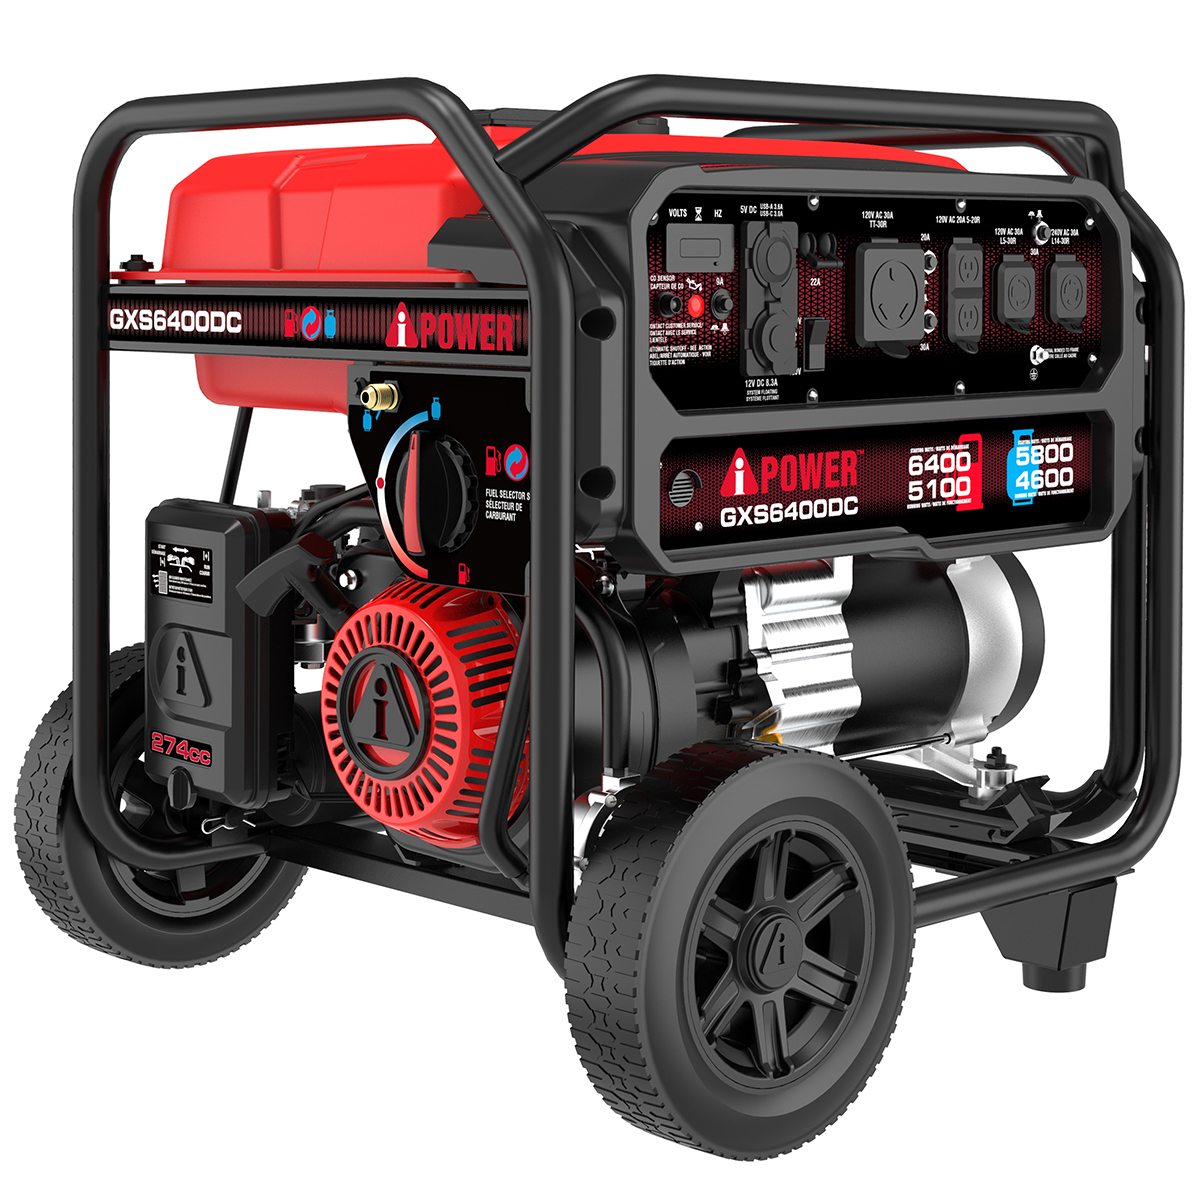 The A-iPower GXS6400DC Dual Fuel Portable Generator runs on gasoline or propane and the heavy-duty frame construction has a durable automotive-style finish. a-ipower.com/products/gxs64… #portablegenerators #generators #generatorpower #findyourpower #aipowerup